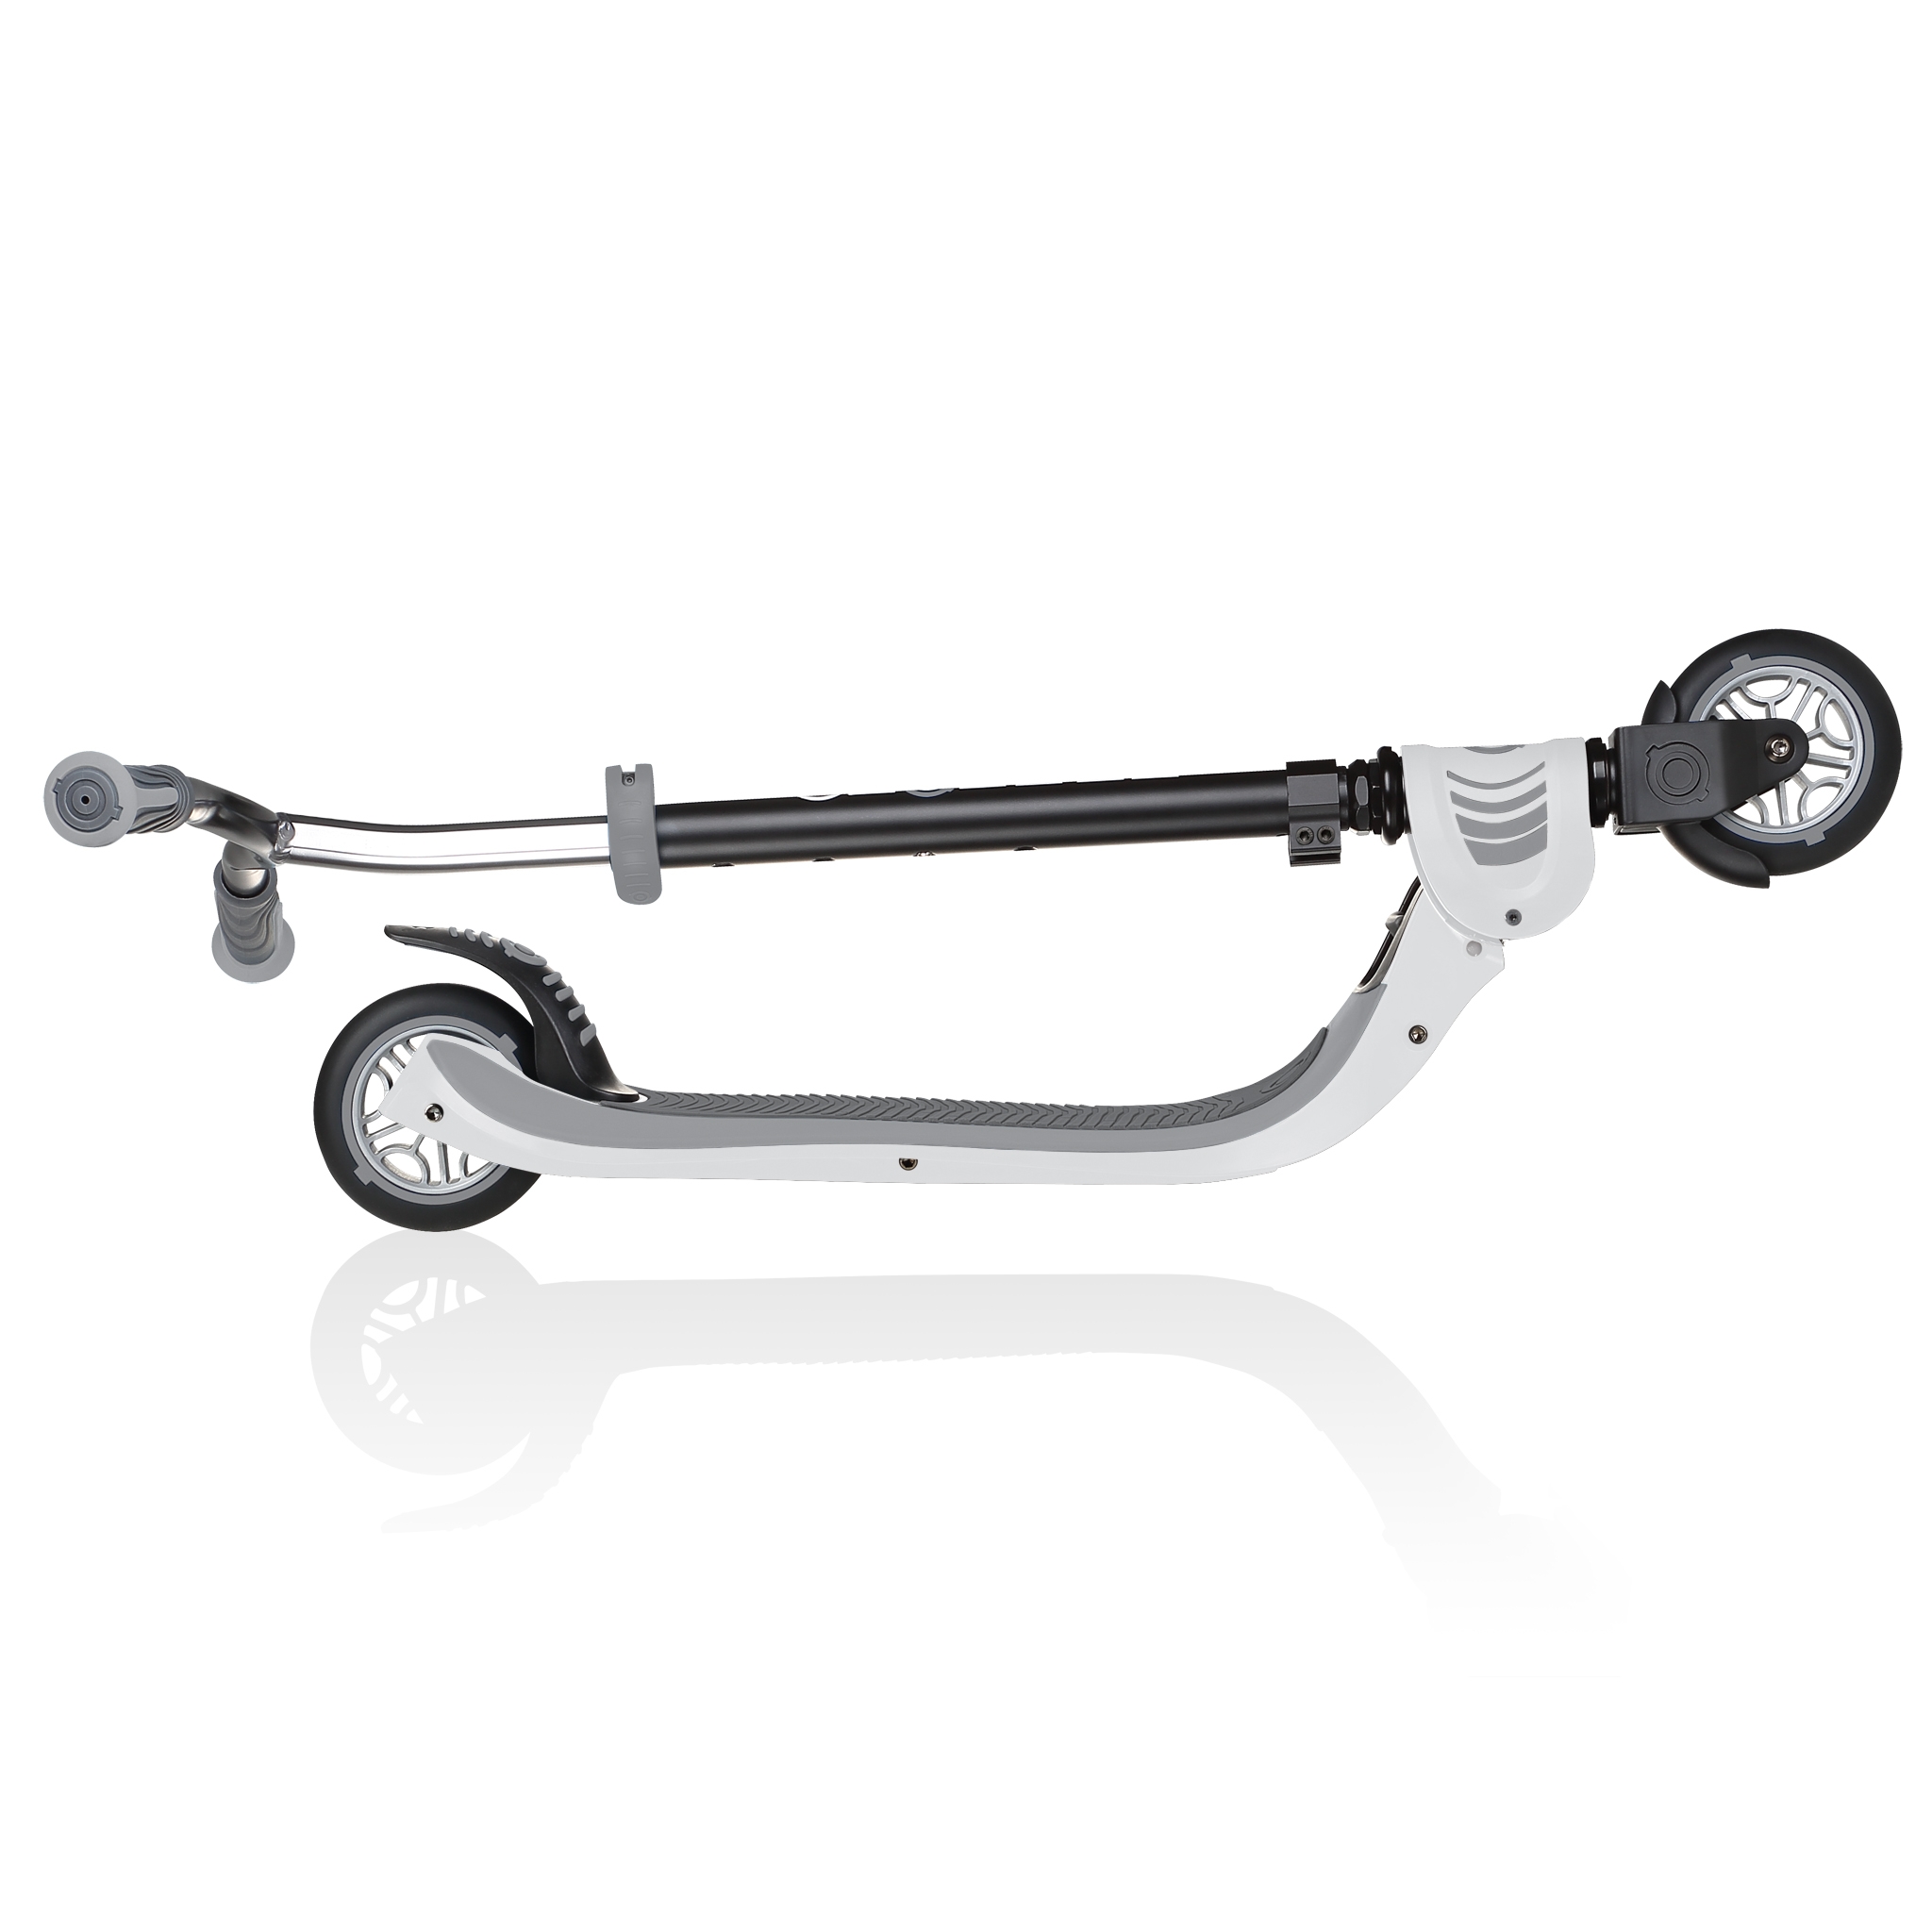 FLOW-FOLDABLE-125-2-wheel-foldable-scooter-for-kids-white 1